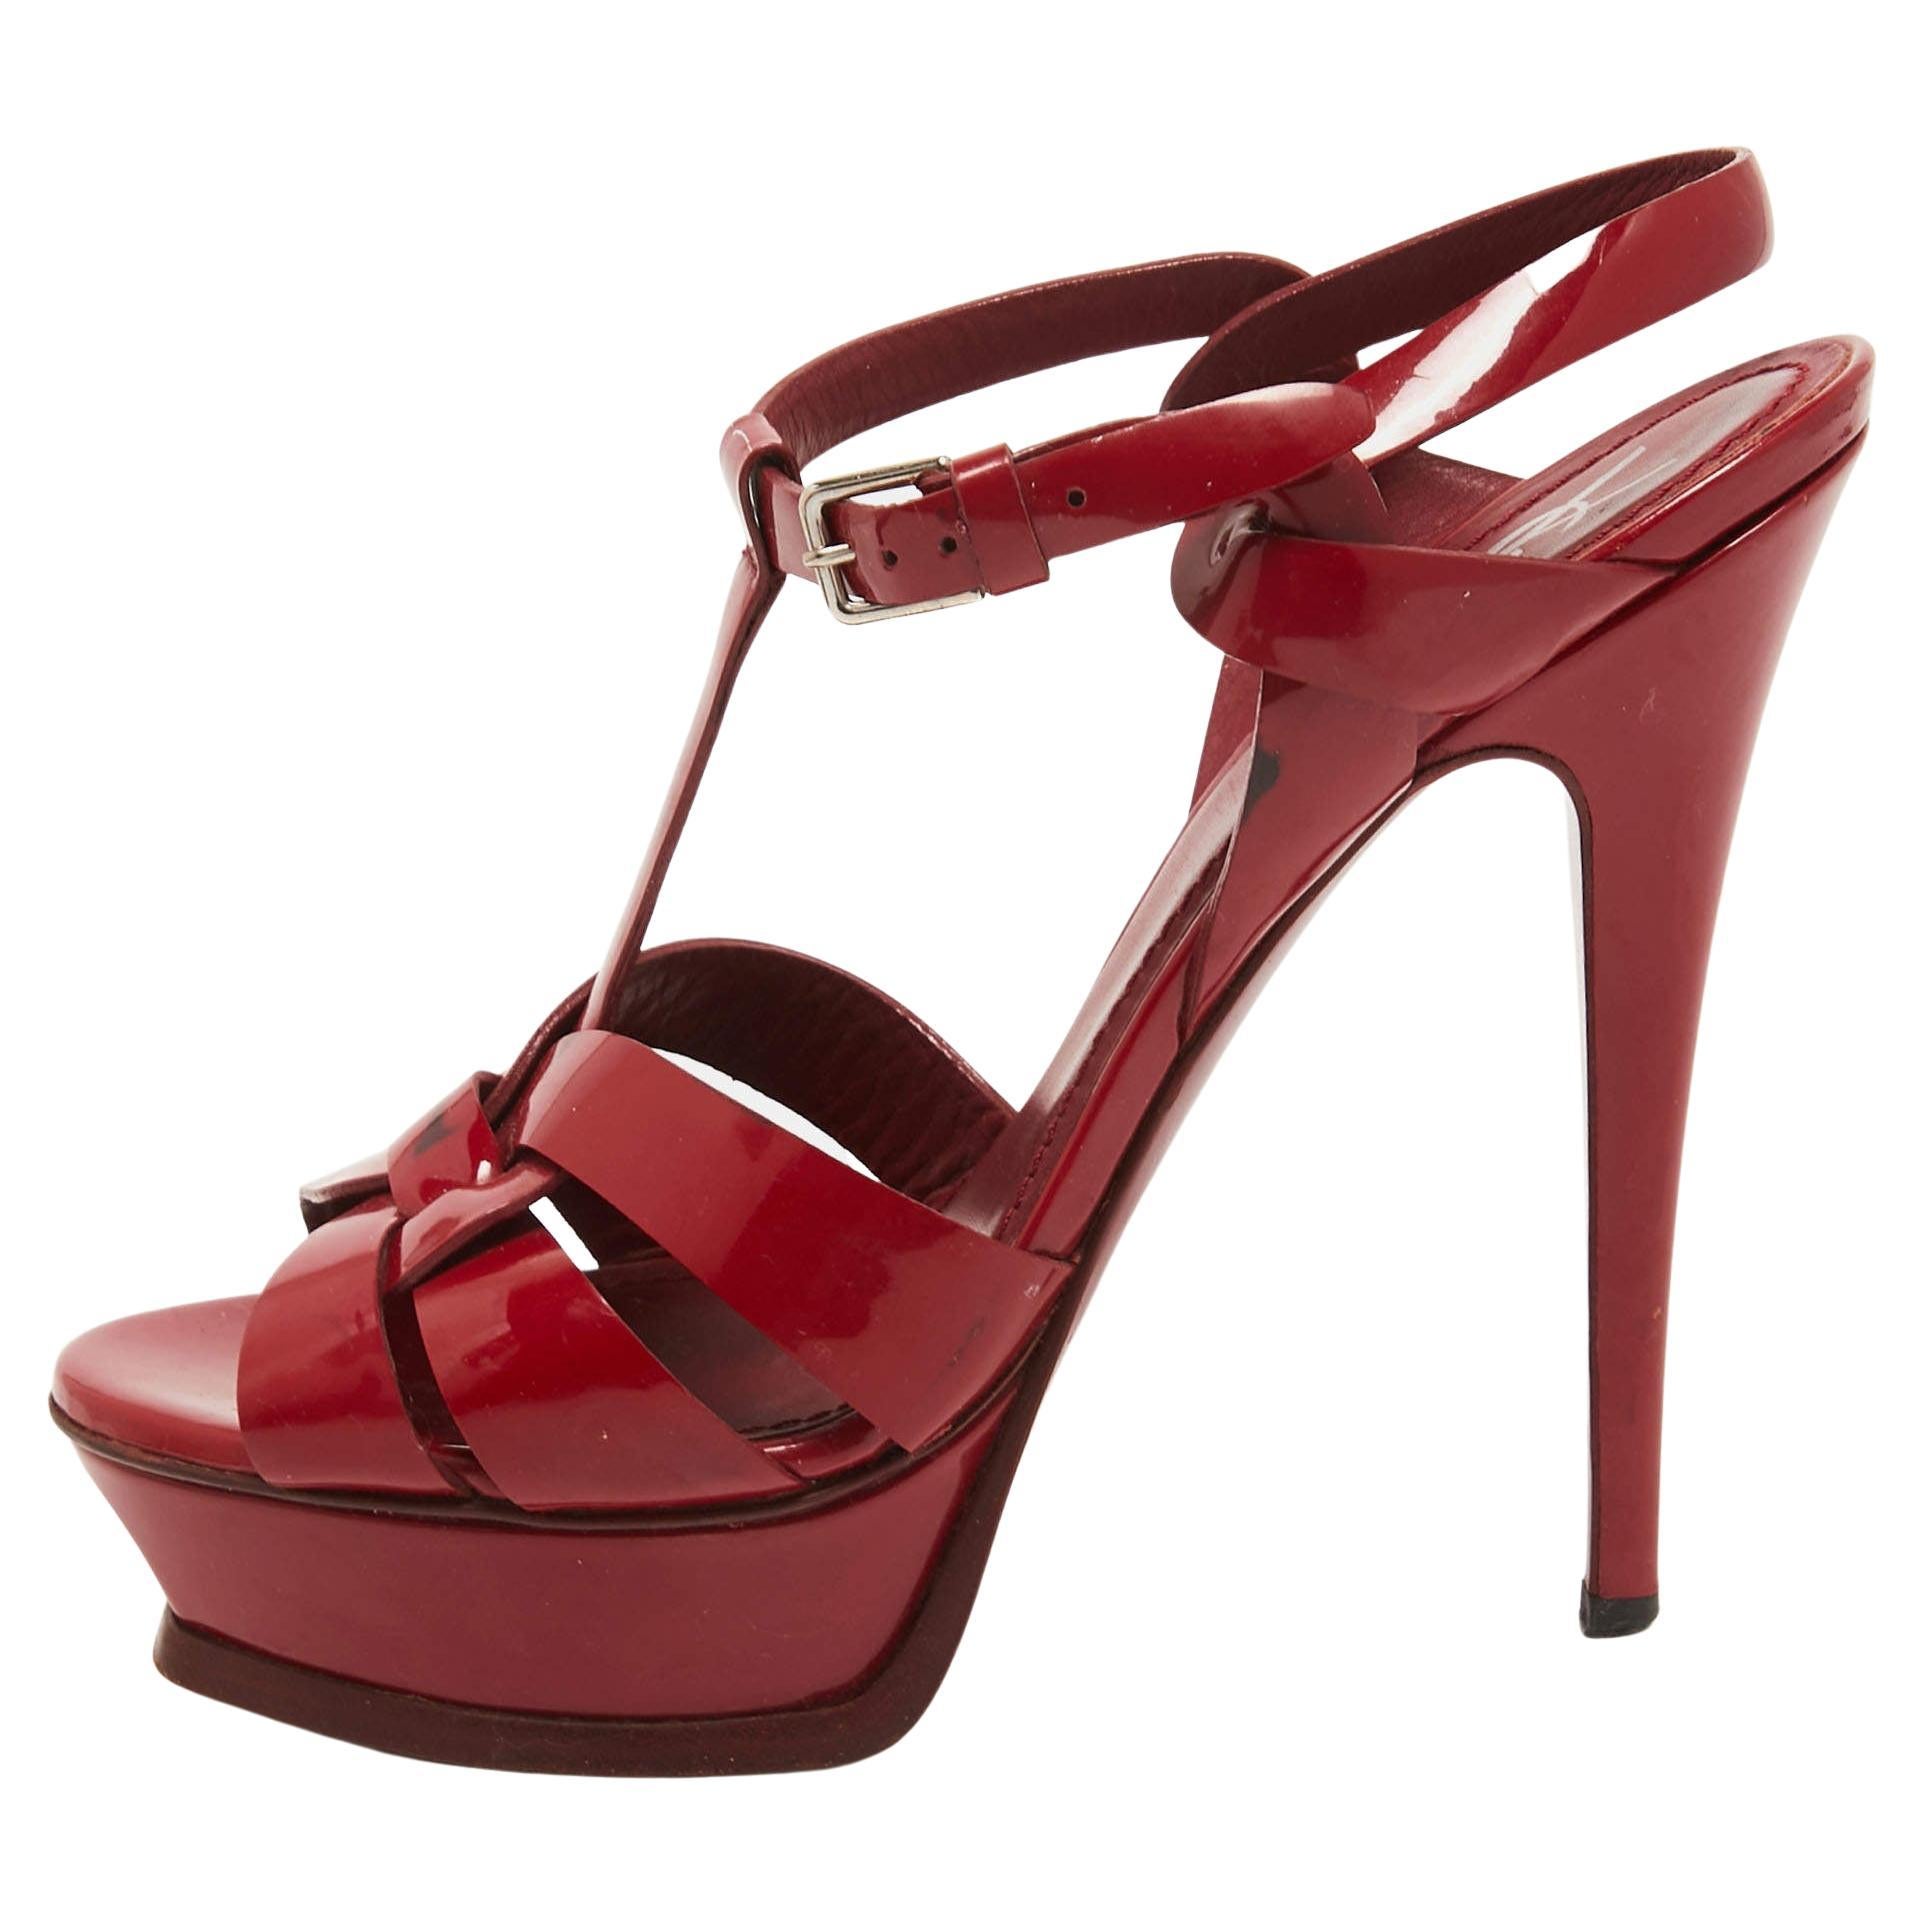 Yves Saint Laurent Burgundy Patent Leather Tribute Sandals Size 38.5 For Sale